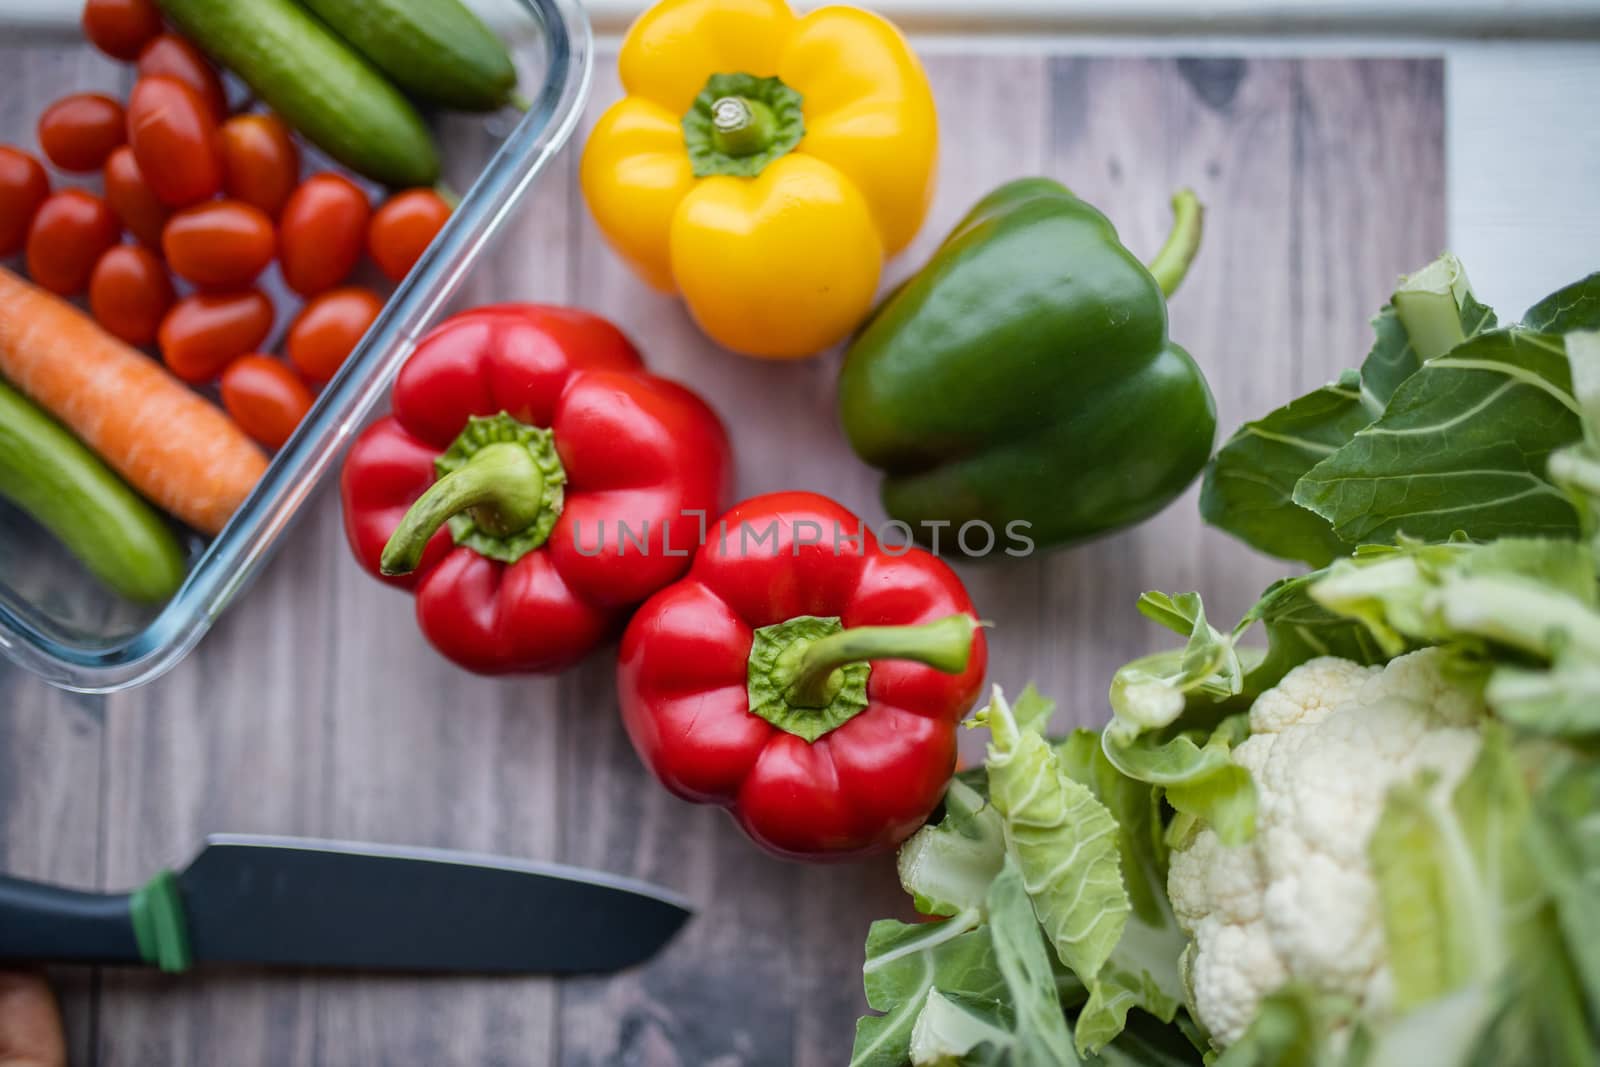 Colorful bell peppers, carrots, tomatoes, zucchini, and cauliflower on table. Fresh vegetables on wooden table from above.Vegan meal ingredients